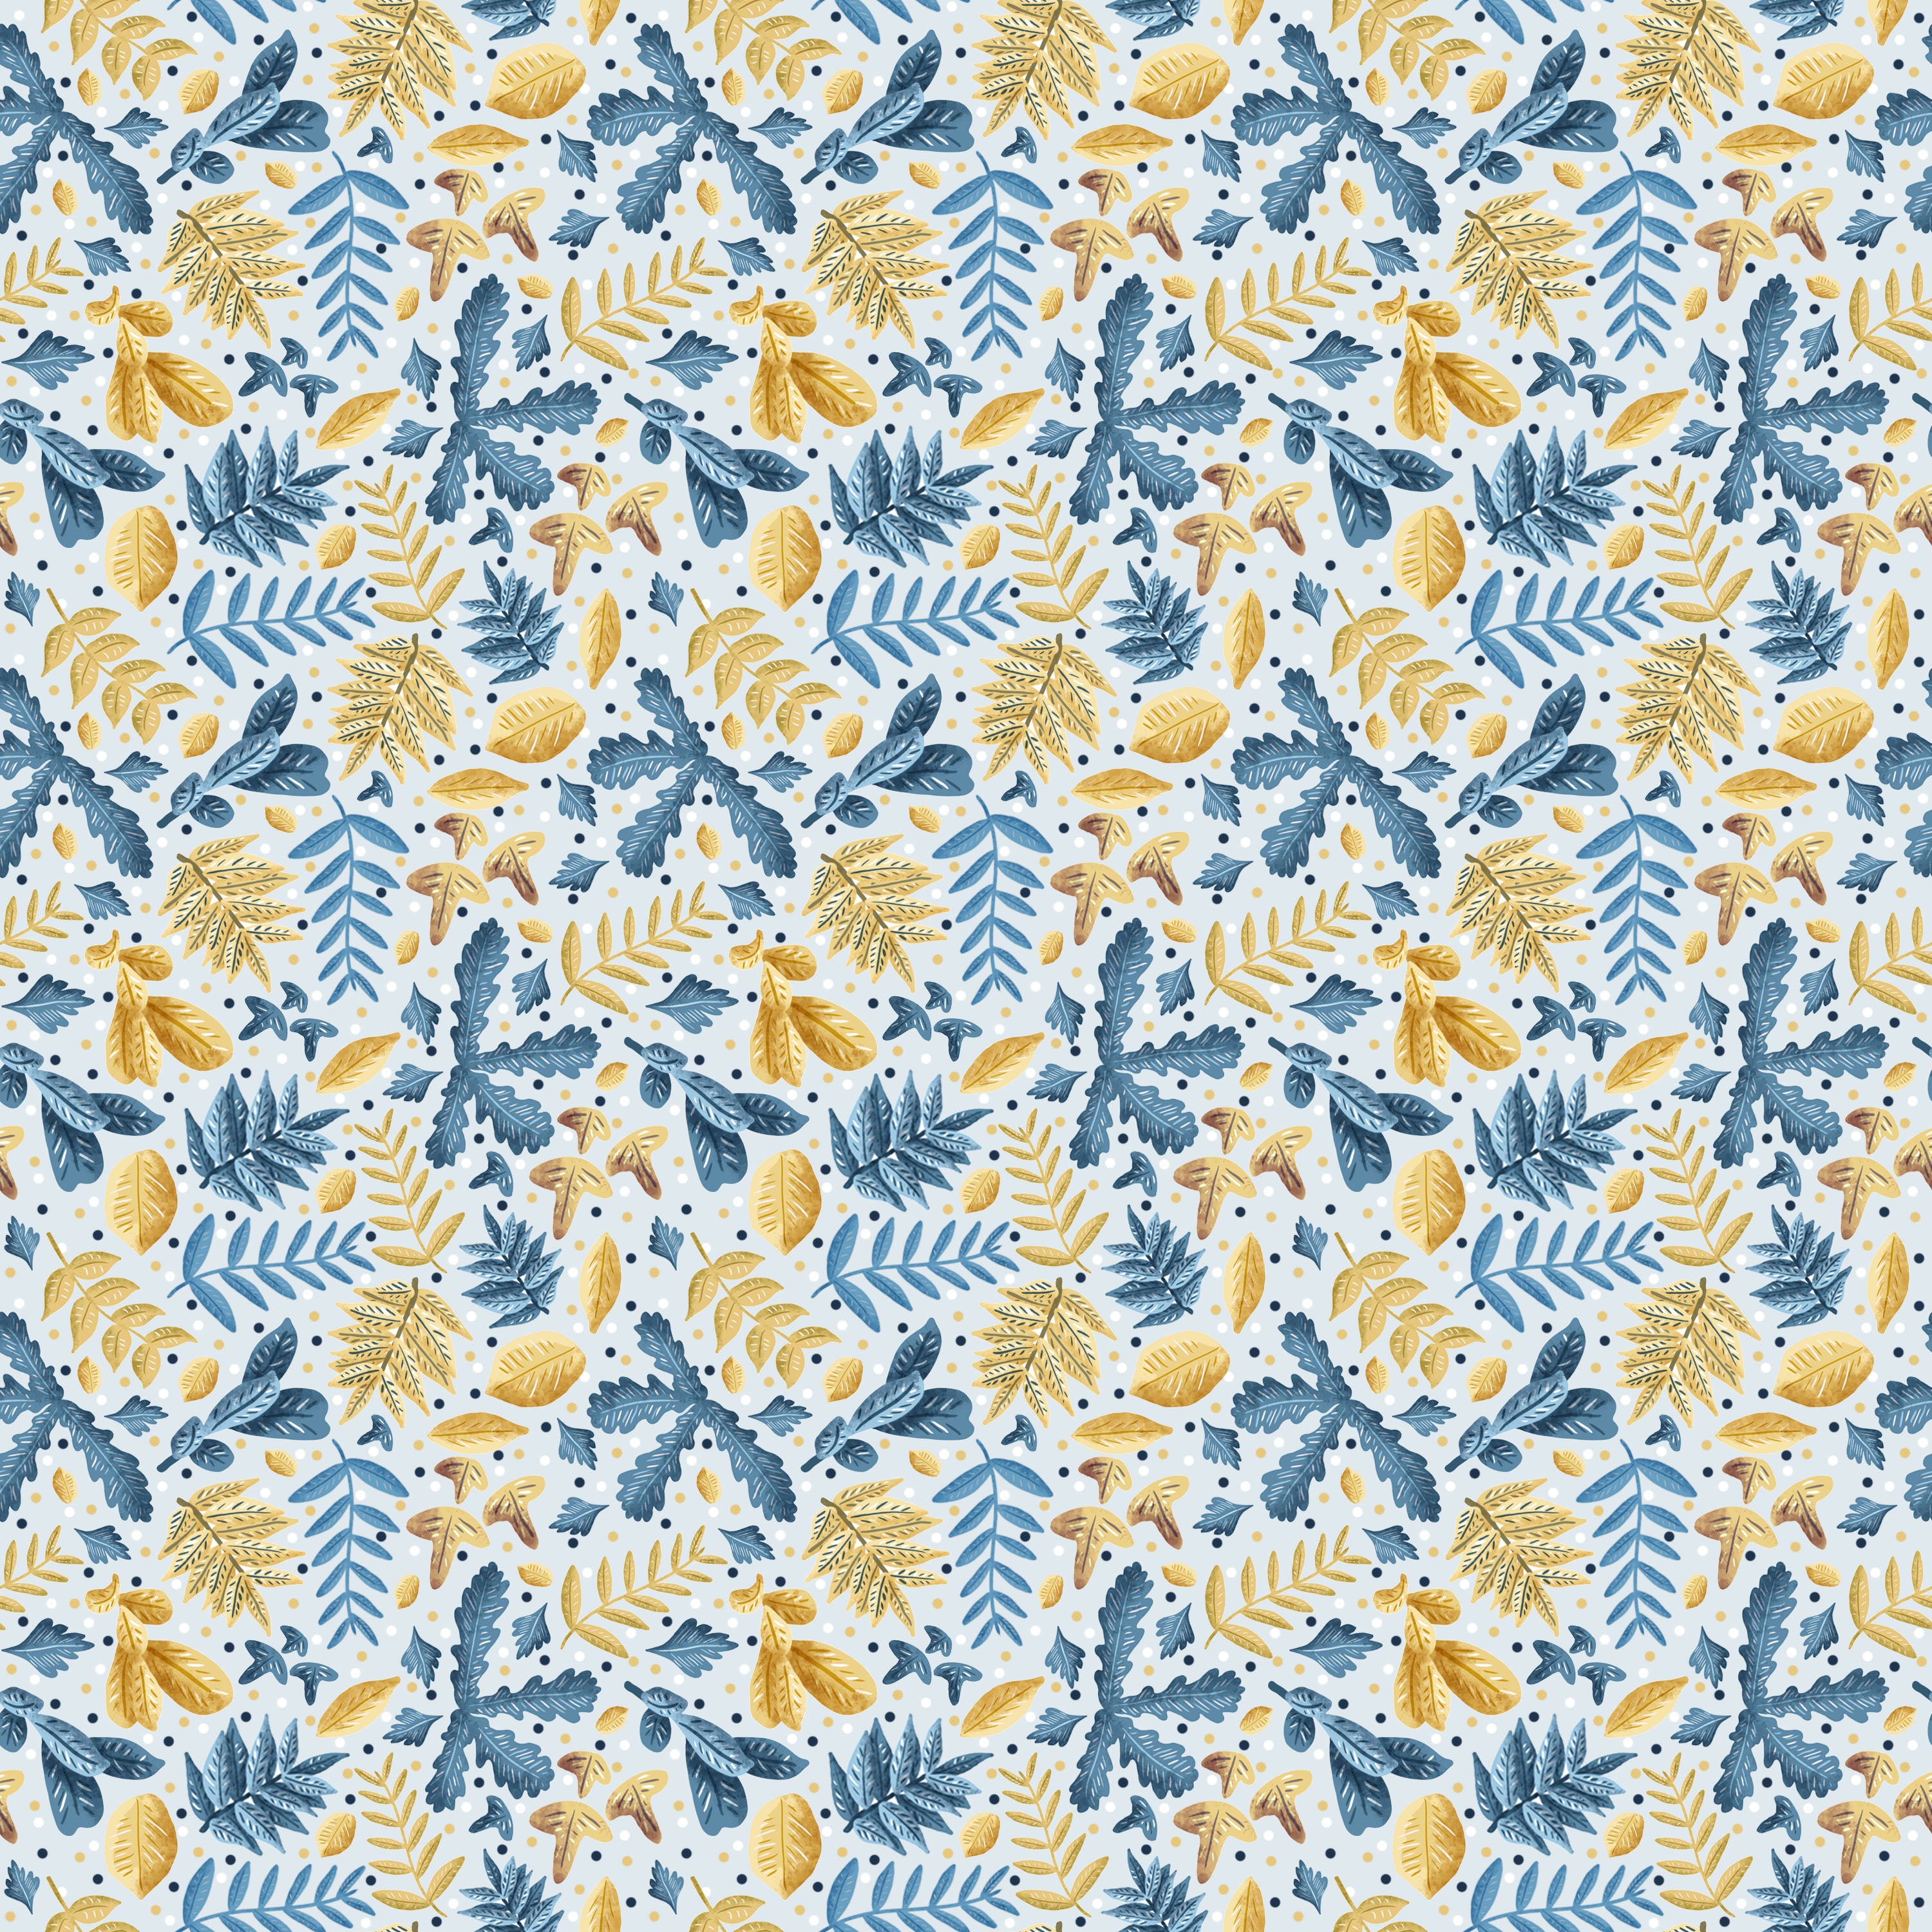 leaves and foliage surface pattern design